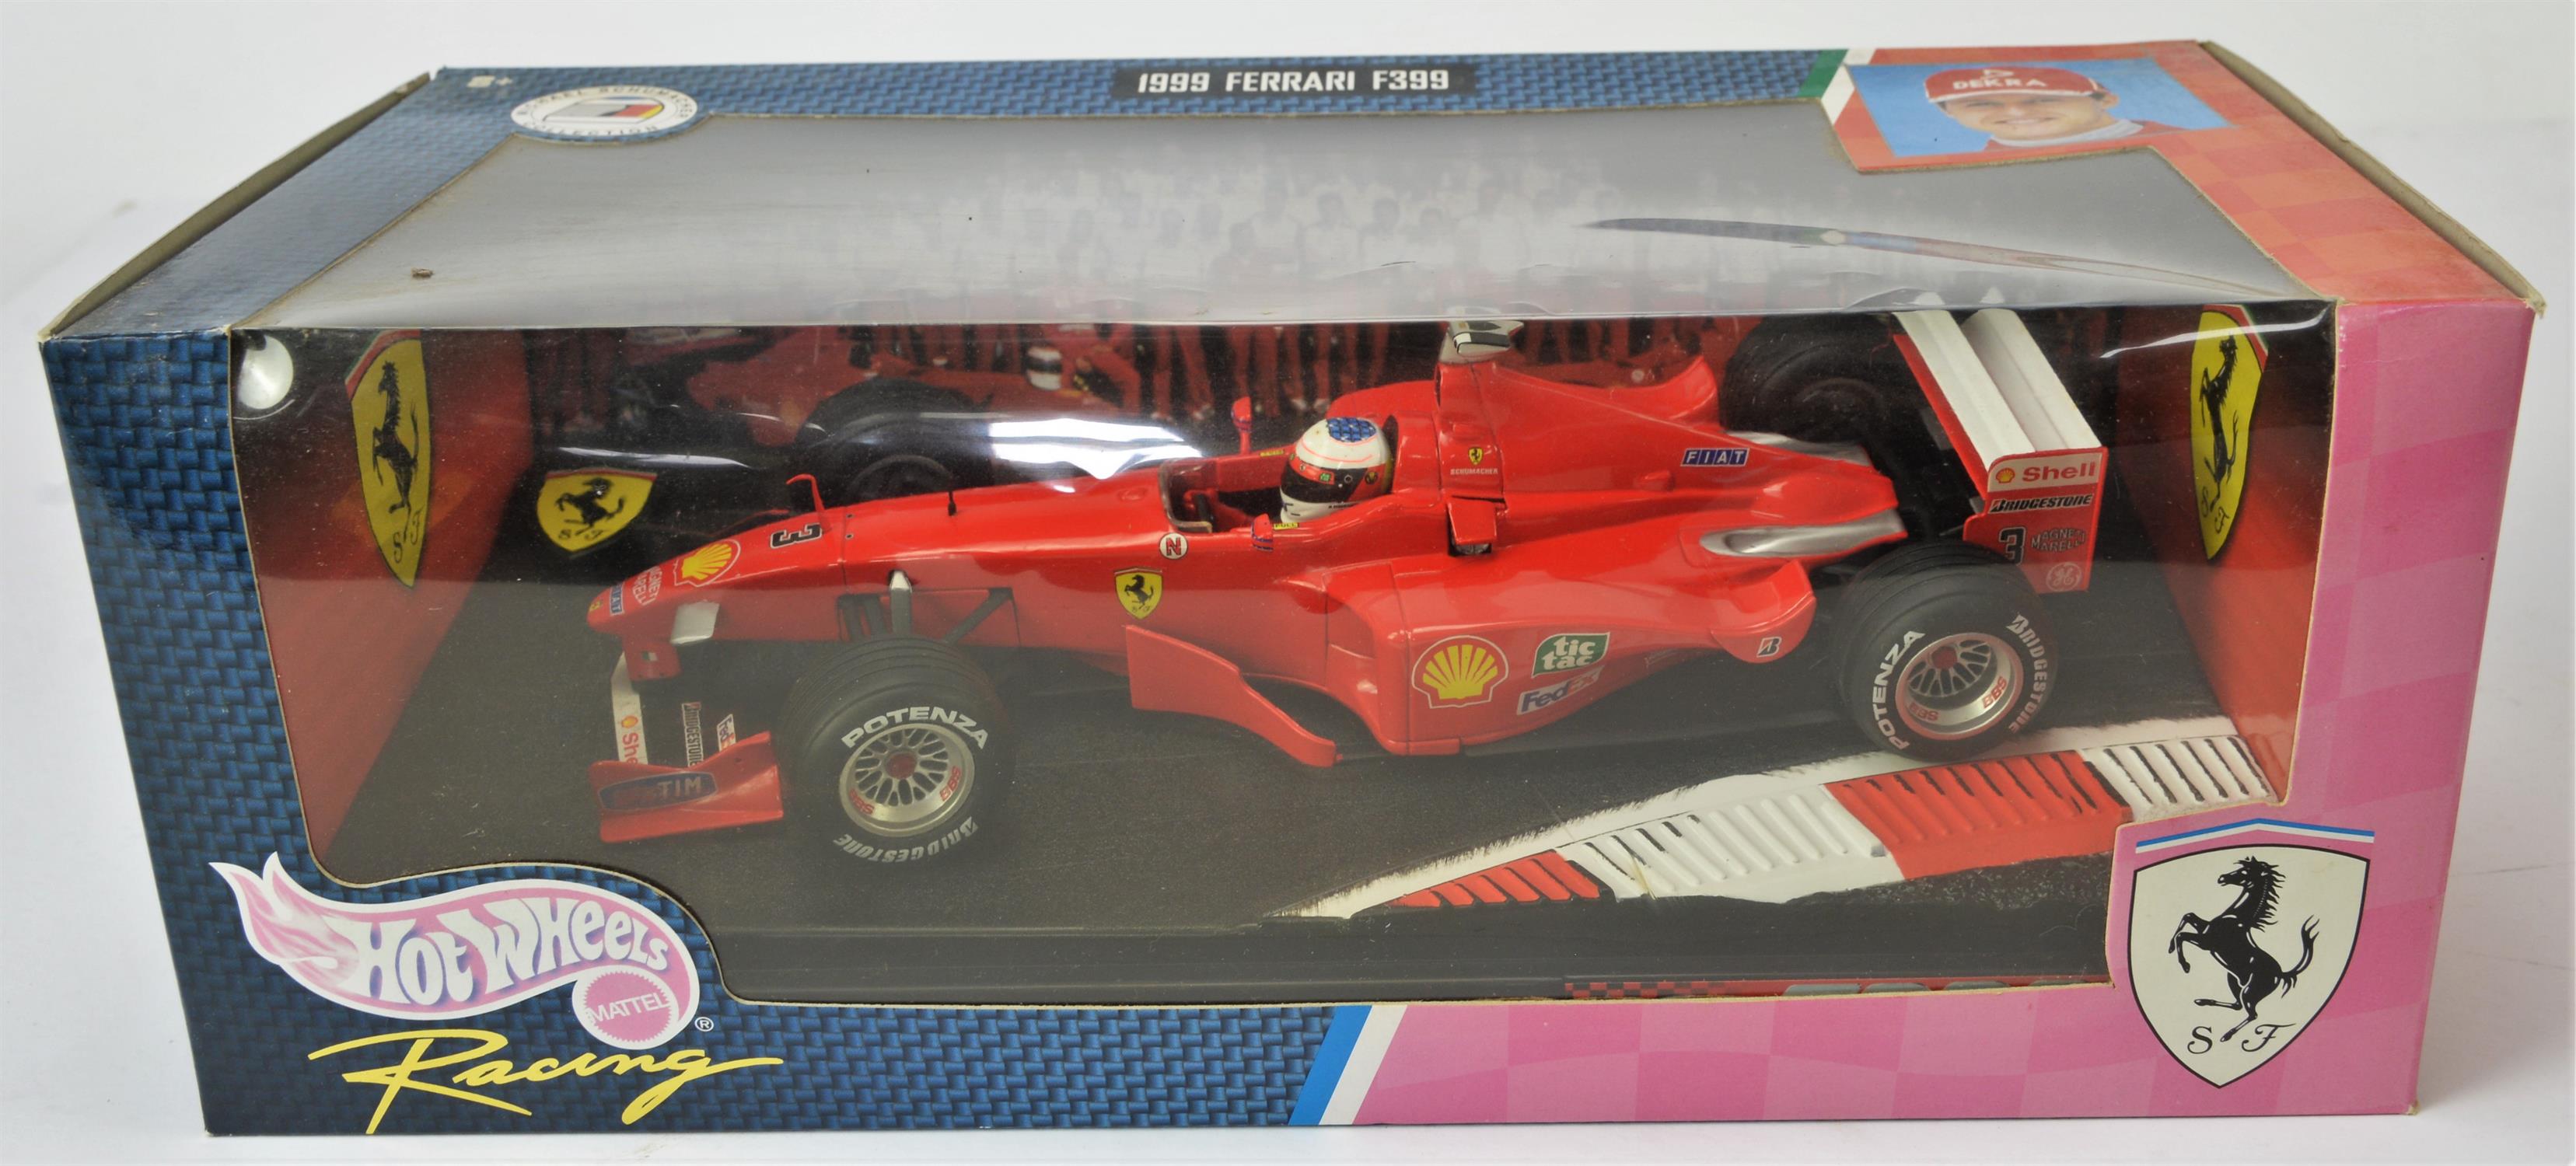 Hot Wheels Racing - Three Michael Schumacher Limited edition collection, Boxed Mattel Ferrari 1:18 - Image 4 of 4